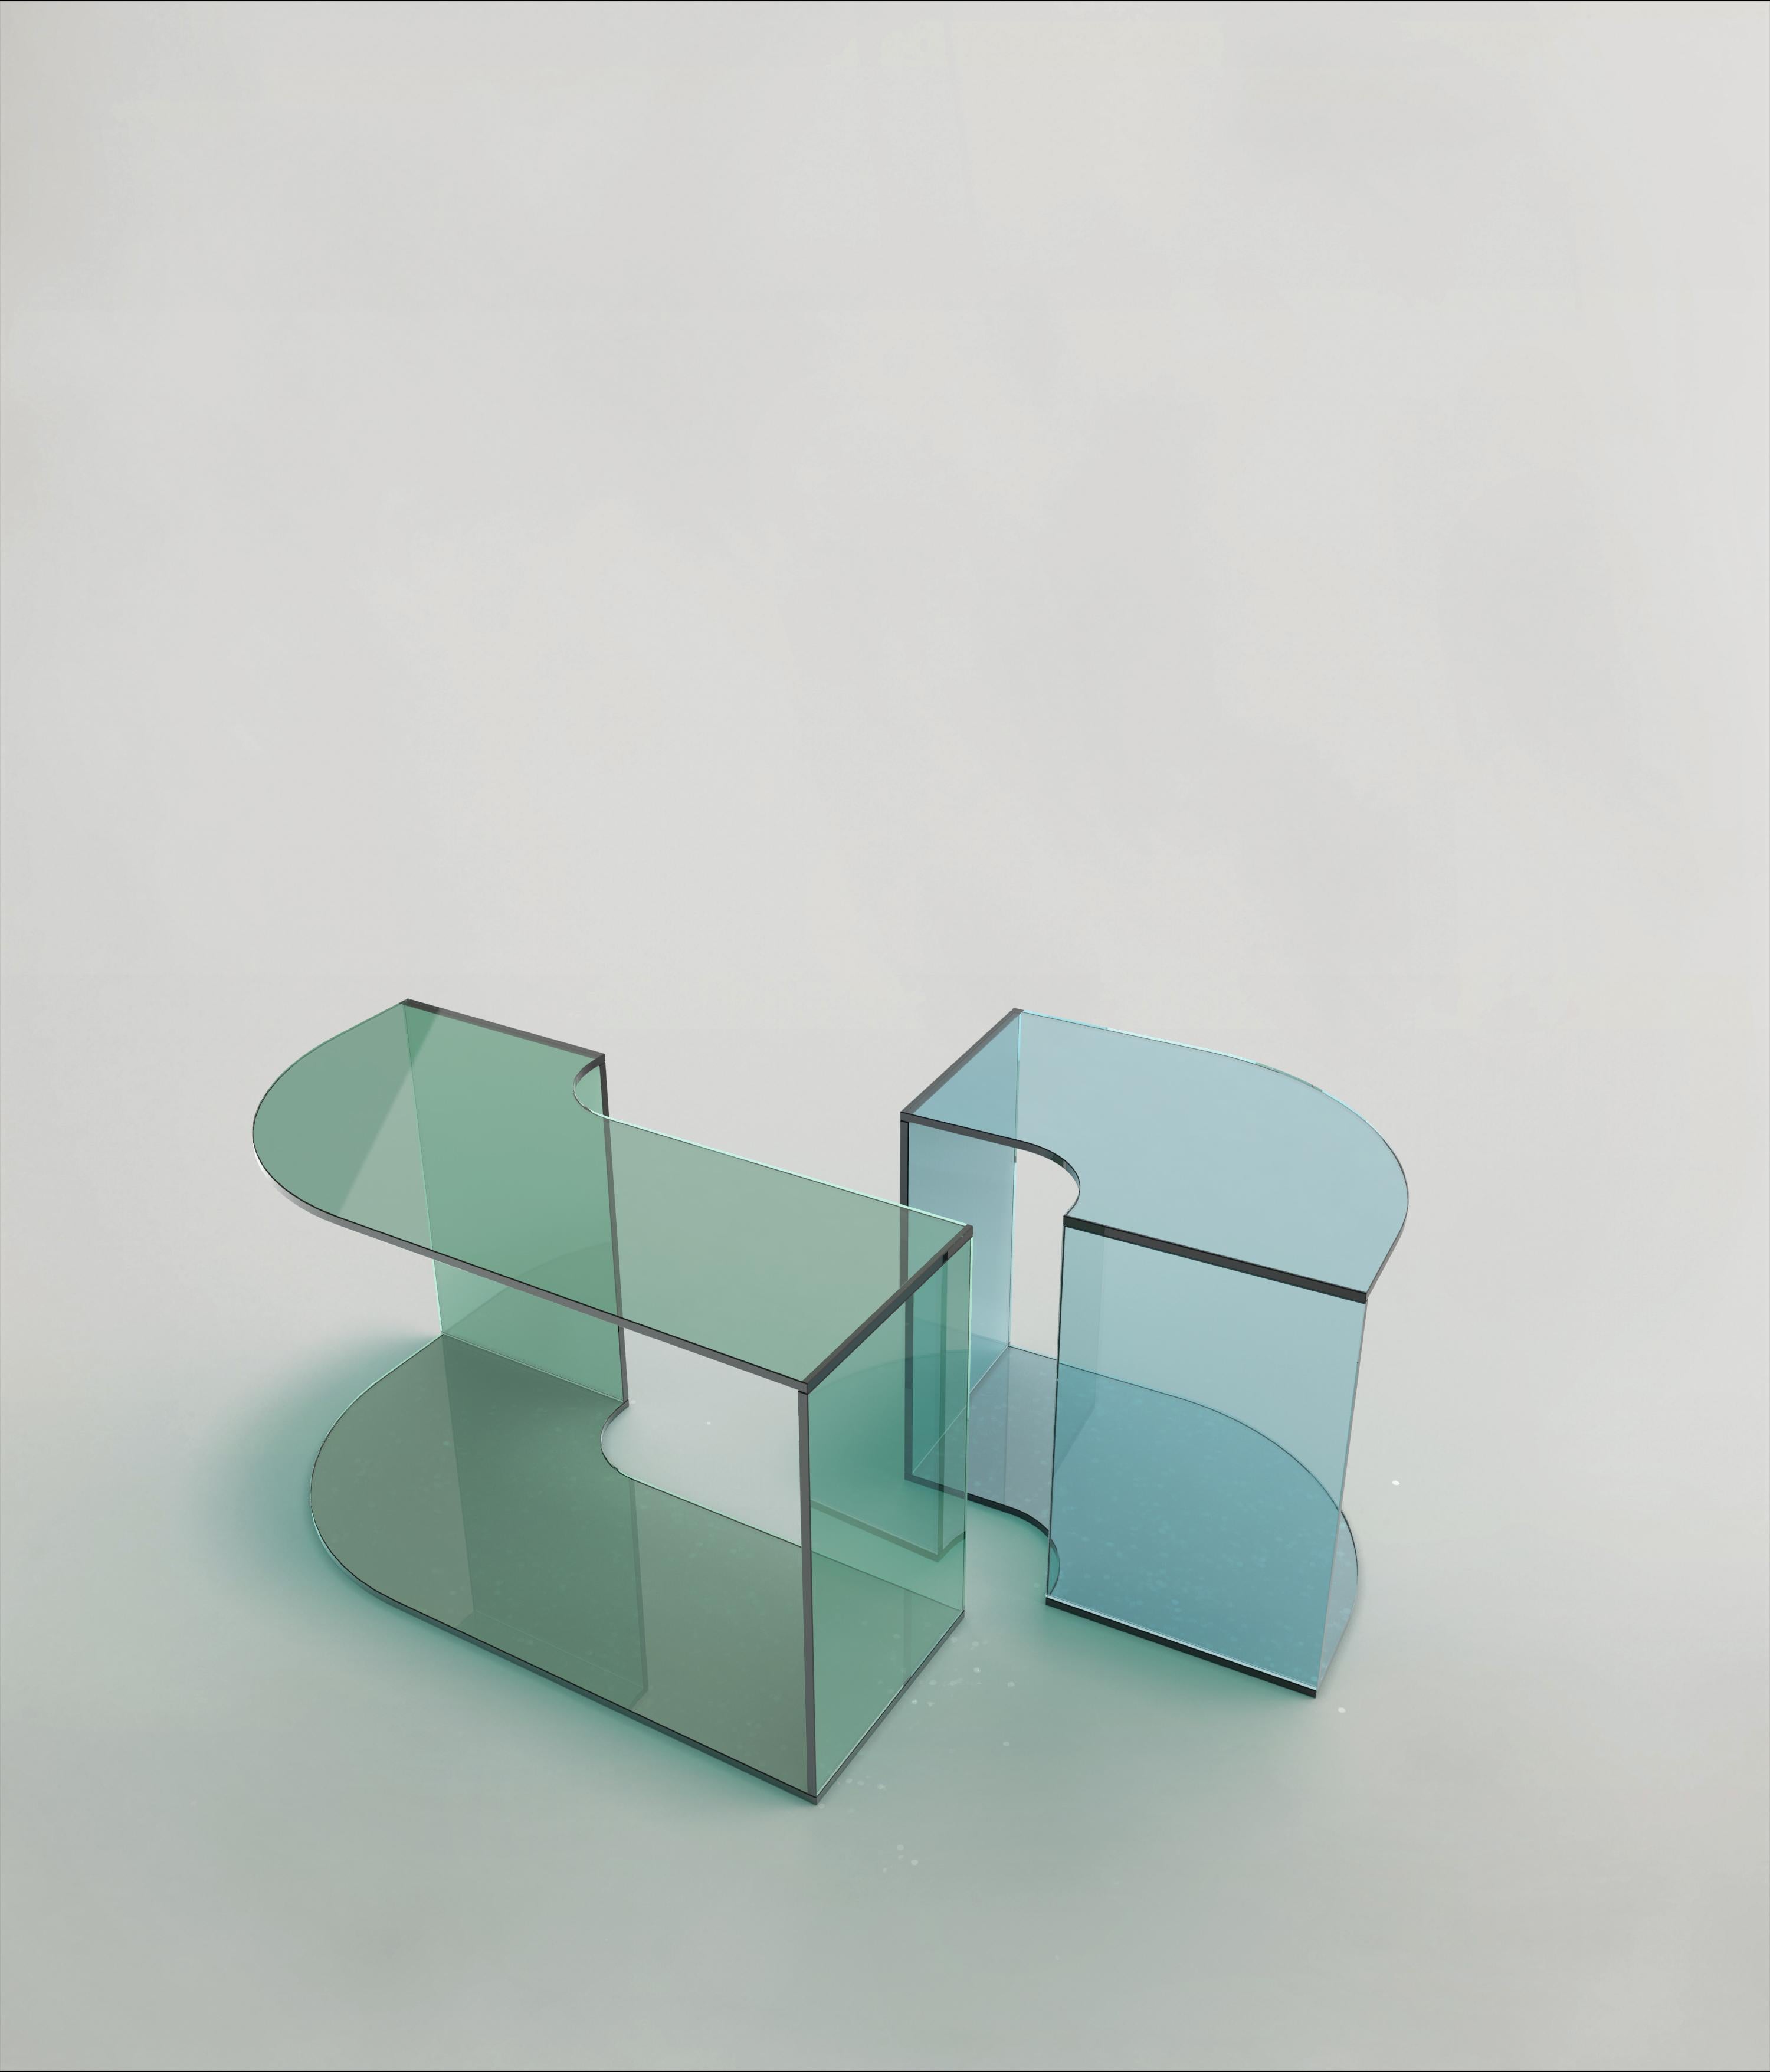 Set of 2 Quarter V1 and V2 Tables by Edizione Limitata
Limited Edition of 1000 pieces. Signed and numbered.
Dimensions: D70 x W35 x H41 cm
Materials: Blue Finish Shiny Glass,Green Shiny Glass

Quarter is a collection of contemporary side tables made